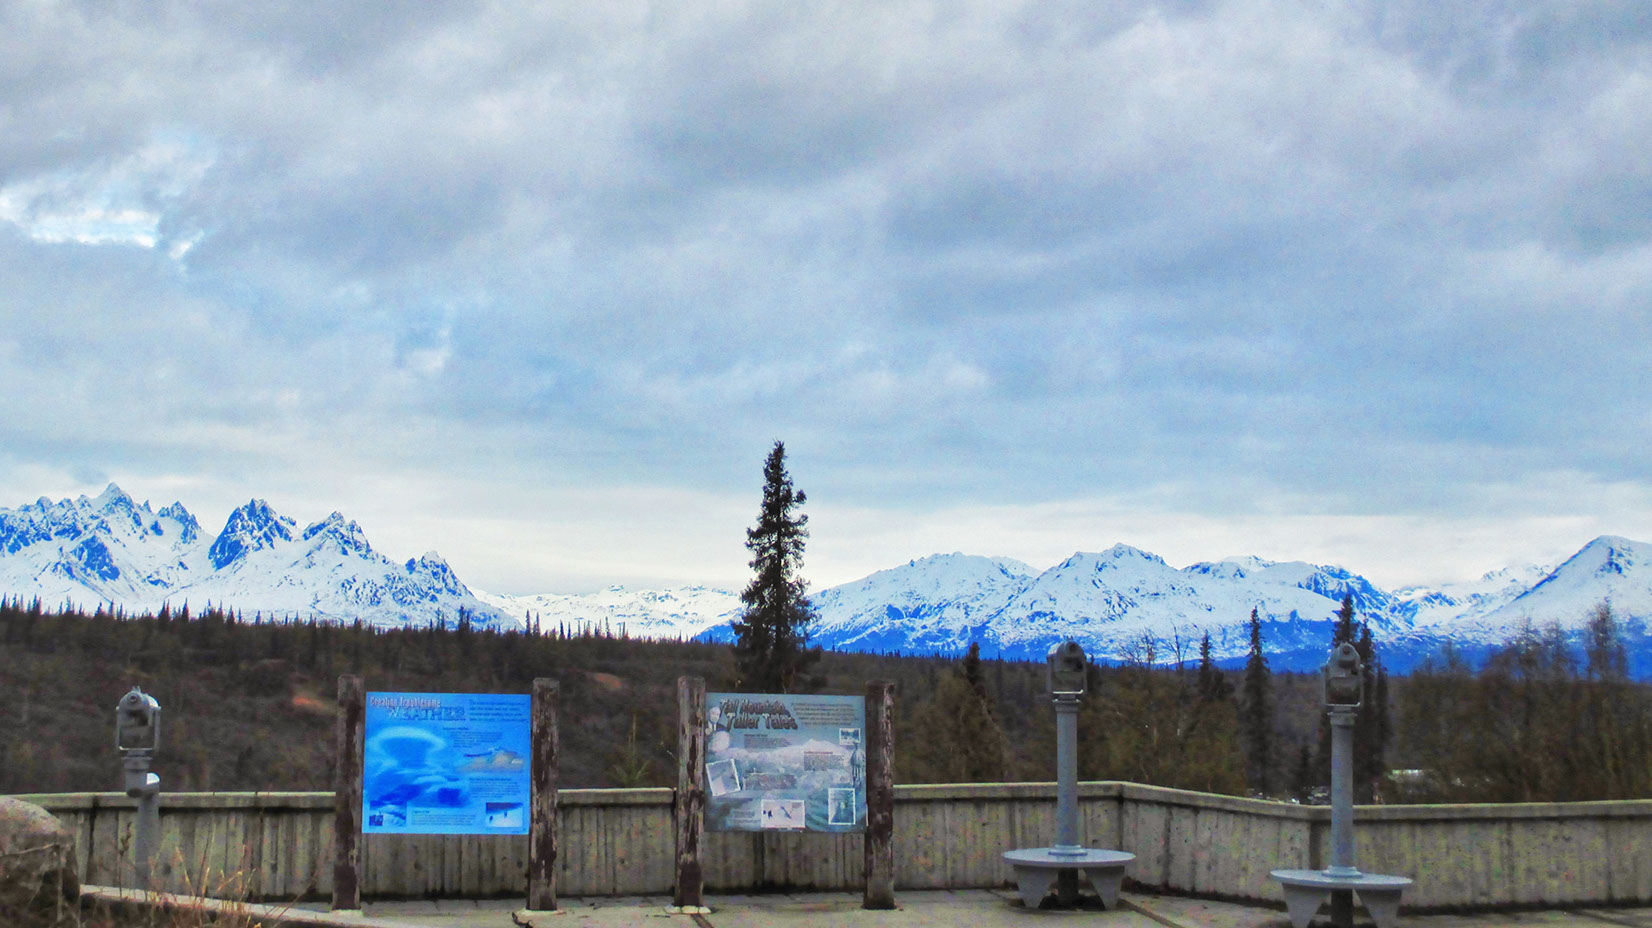 View of Mount Denali from the highway pullout in Alaska